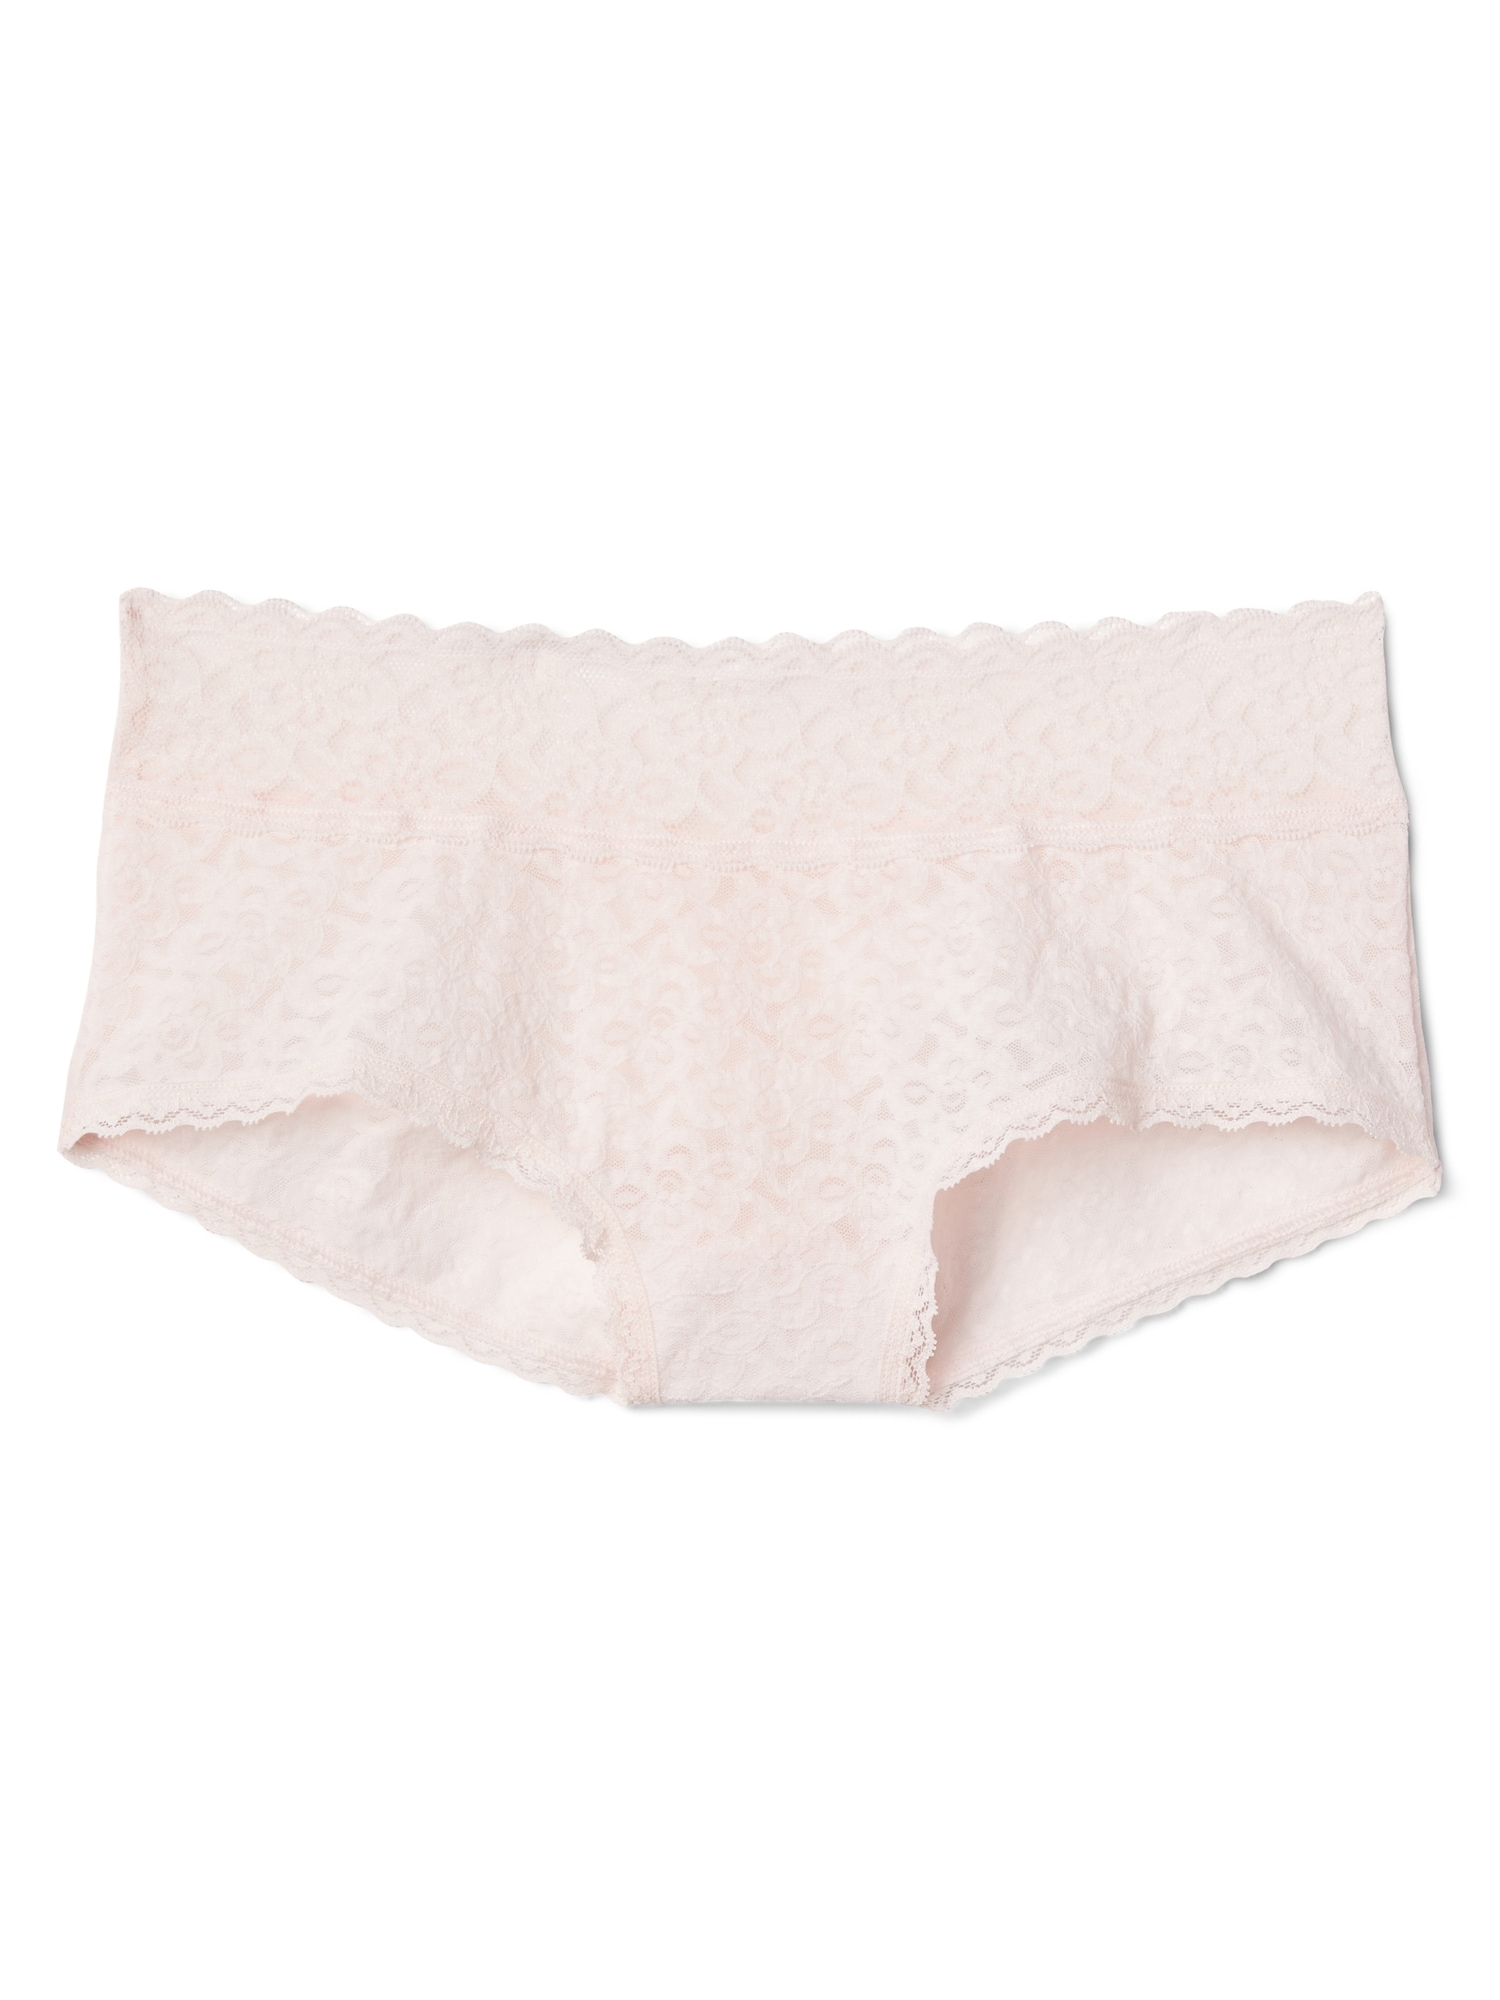 Gap Lace Shorty pink. 1